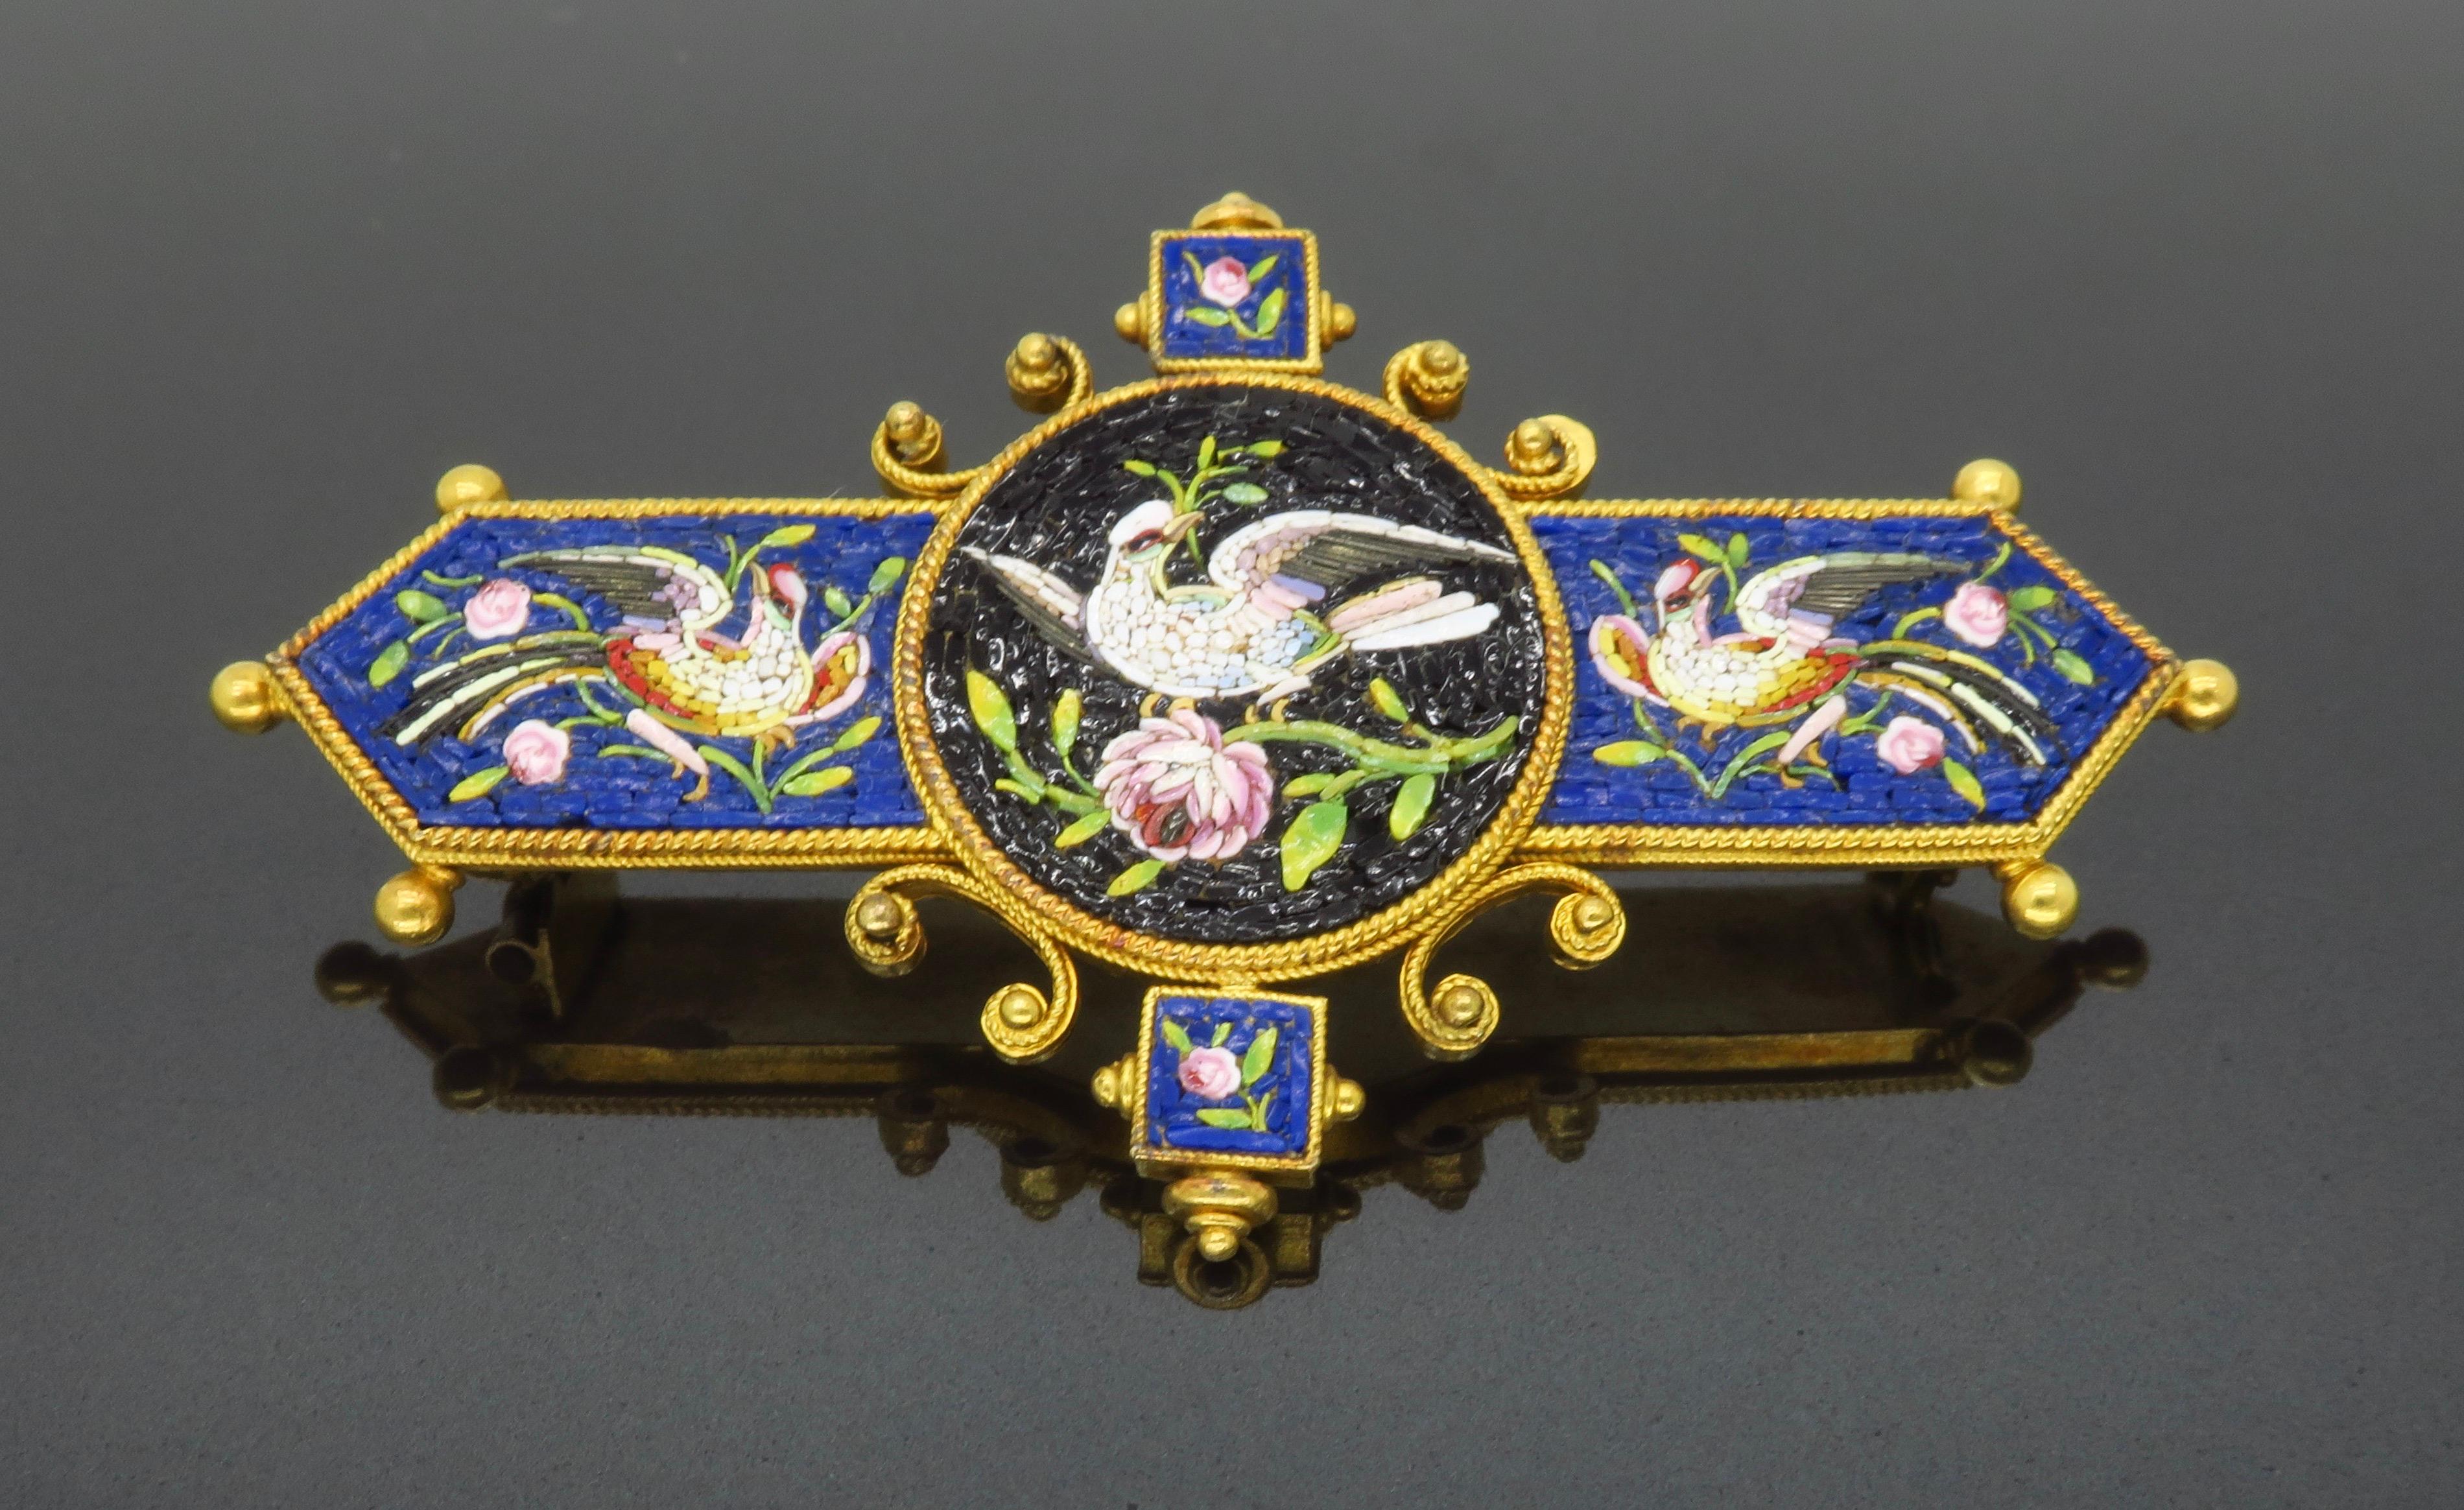 Exceptional Victorian Micro Mosaic brooch made in 18k yellow gold. The ornate detail captures three playful birds with blooming flower accents. This stunning design is created using tiny colorful stones comprised by hand to create the depth. The